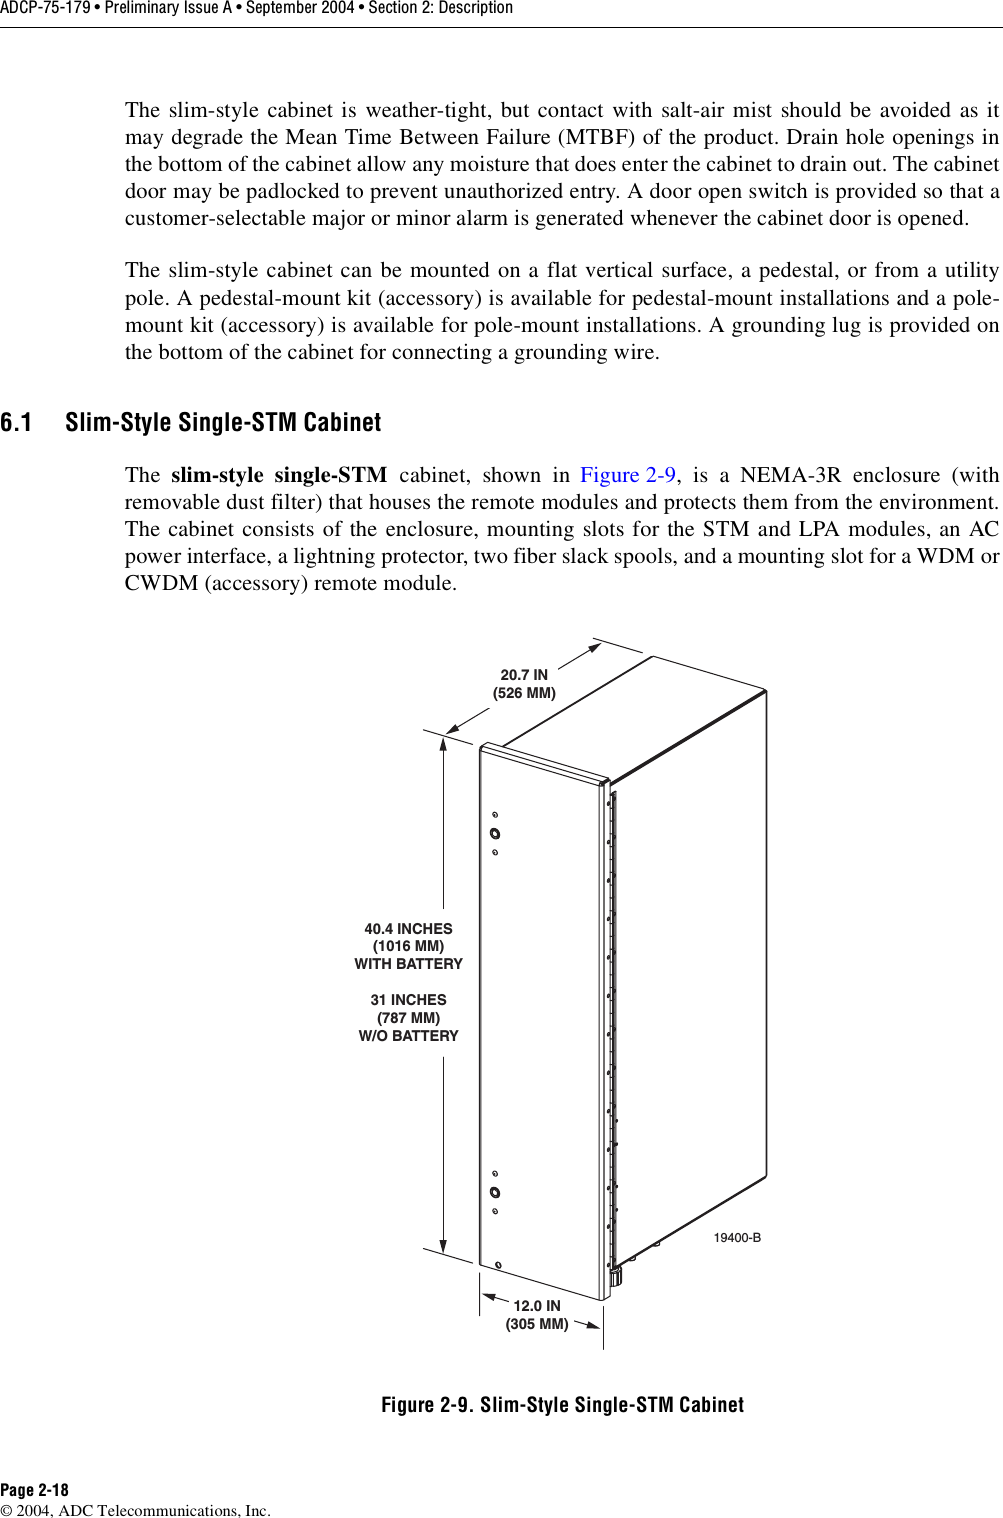 ADCP-75-179 • Preliminary Issue A • September 2004 • Section 2: DescriptionPage 2-18© 2004, ADC Telecommunications, Inc.The slim-style cabinet is weather-tight, but contact with salt-air mist should be avoided as itmay degrade the Mean Time Between Failure (MTBF) of the product. Drain hole openings inthe bottom of the cabinet allow any moisture that does enter the cabinet to drain out. The cabinetdoor may be padlocked to prevent unauthorized entry. A door open switch is provided so that acustomer-selectable major or minor alarm is generated whenever the cabinet door is opened. The slim-style cabinet can be mounted on a flat vertical surface, a pedestal, or from a utilitypole. A pedestal-mount kit (accessory) is available for pedestal-mount installations and a pole-mount kit (accessory) is available for pole-mount installations. A grounding lug is provided onthe bottom of the cabinet for connecting a grounding wire. 6.1 Slim-Style Single-STM CabinetThe  slim-style single-STM cabinet, shown in Figure 2-9, is a NEMA-3R enclosure (withremovable dust filter) that houses the remote modules and protects them from the environment.The cabinet consists of the enclosure, mounting slots for the STM and LPA modules, an ACpower interface, a lightning protector, two fiber slack spools, and a mounting slot for a WDM orCWDM (accessory) remote module. Figure 2-9. Slim-Style Single-STM Cabinet19400-B12.0 IN(305 MM)20.7 IN(526 MM)40.4 INCHES(1016 MM)WITH BATTERY 31 INCHES(787 MM)W/O BATTERY